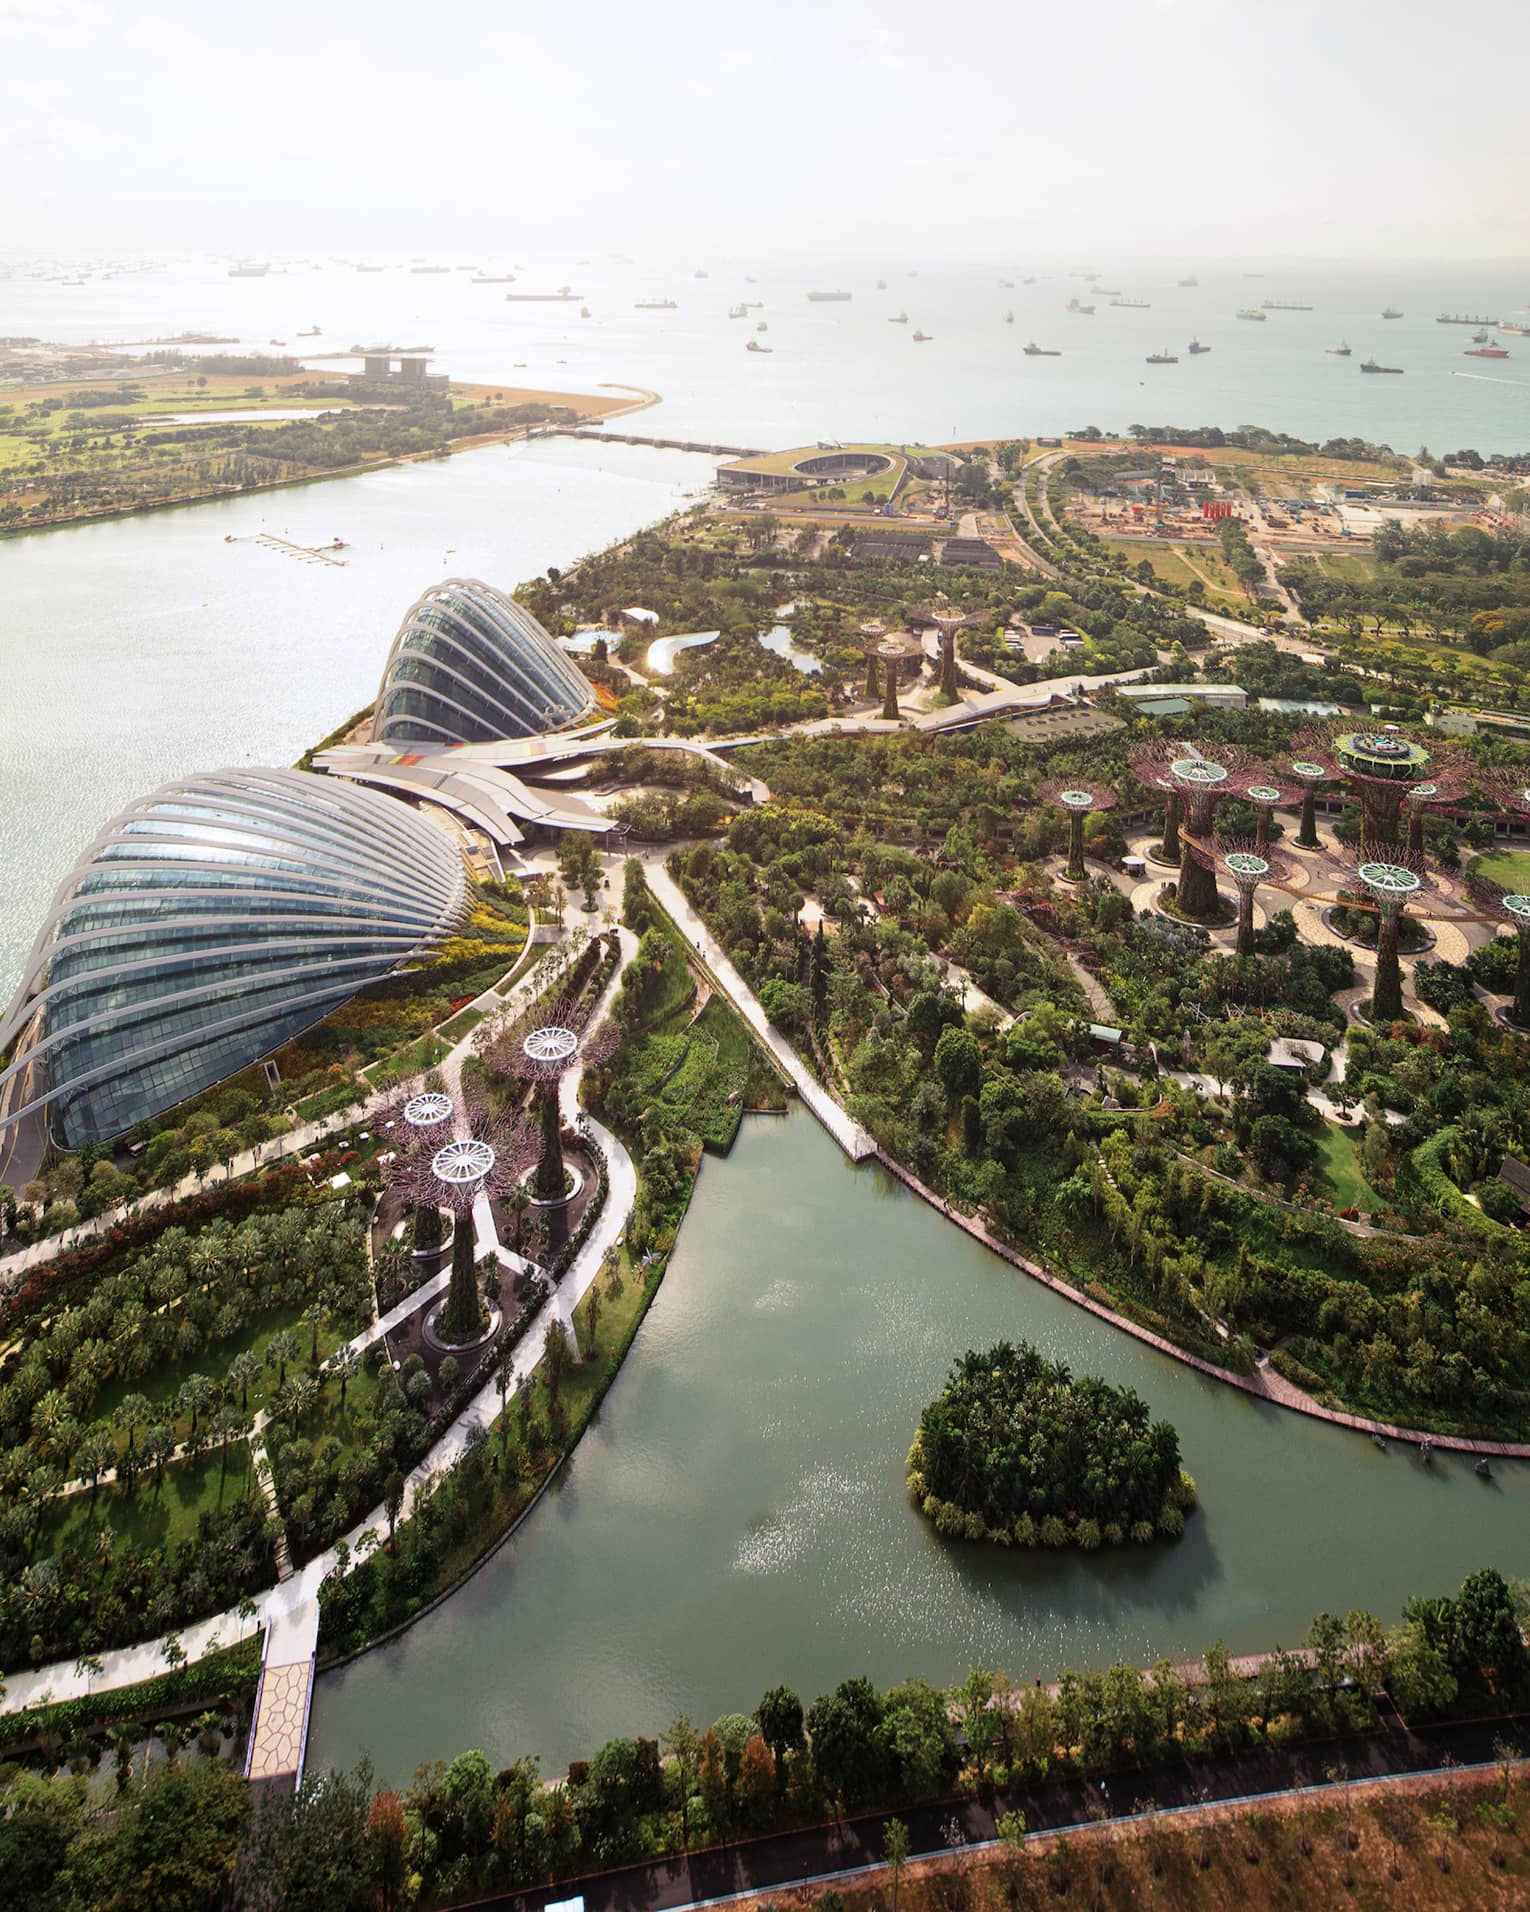 Aerial view of Singapore Gardens by the Bay trees, paths, glass domes by water 